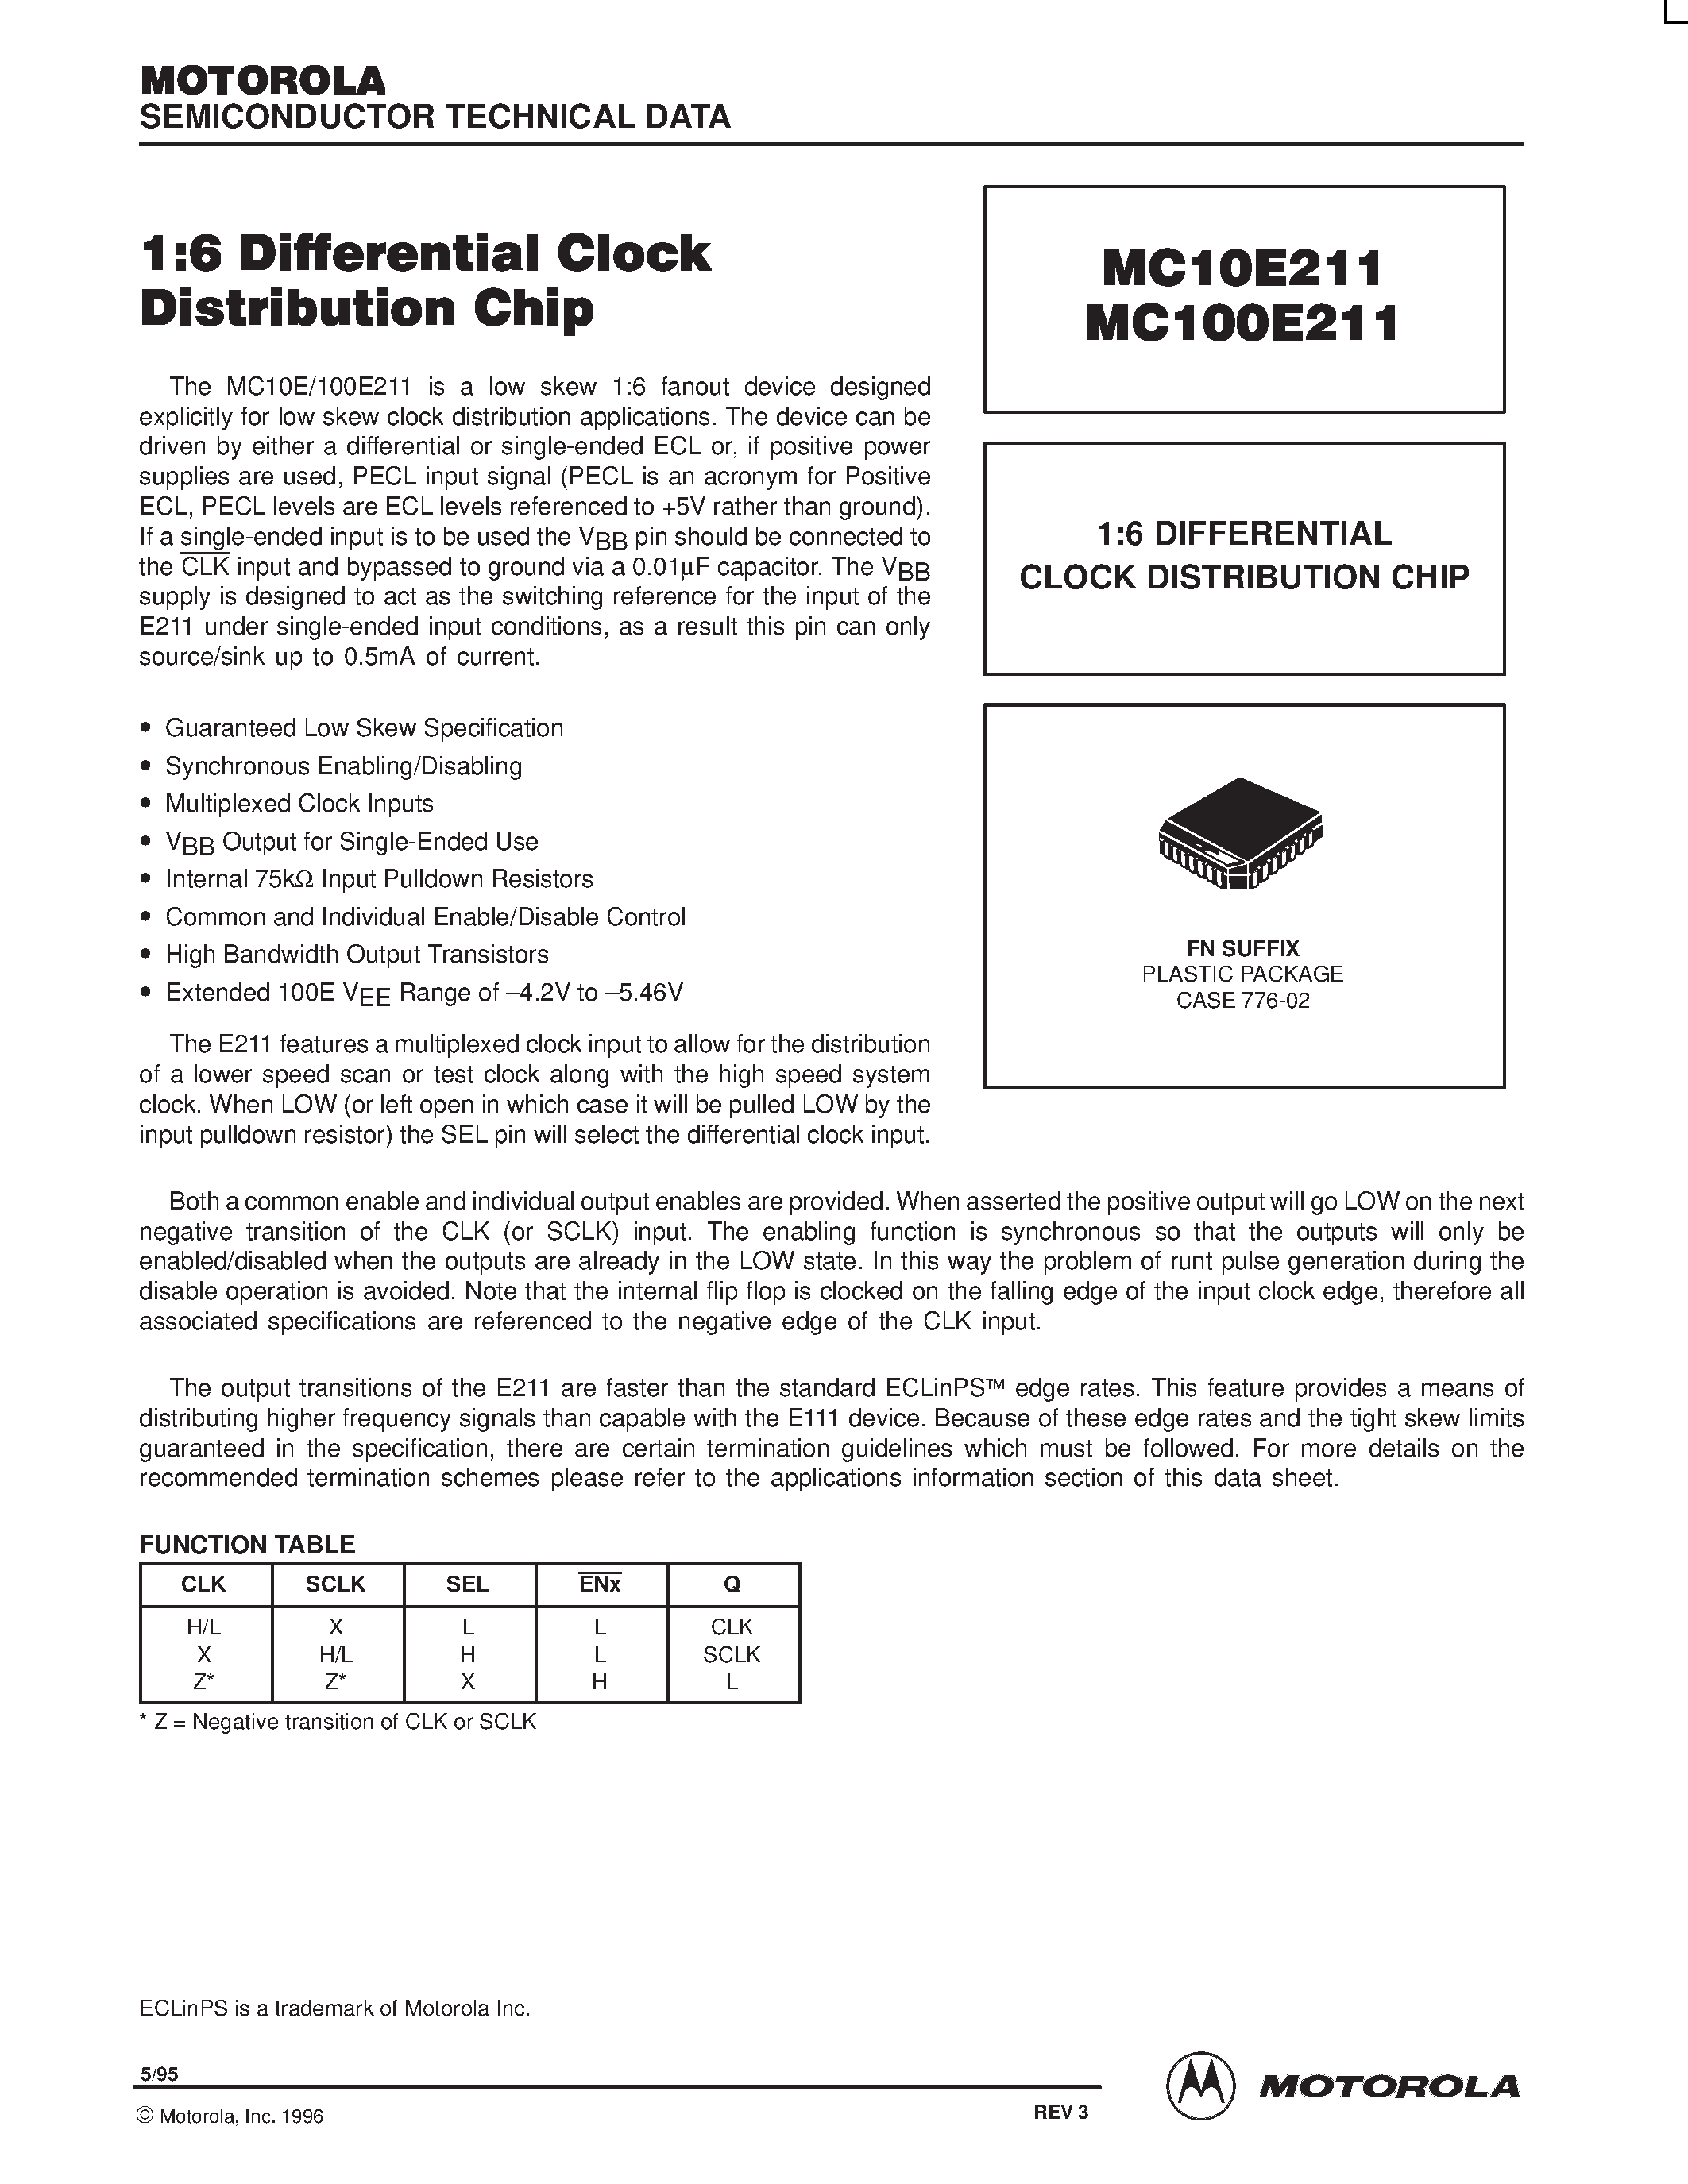 Datasheet MC100E211 - 1:6 DIFFERENTIAL CLOCK DISTRIBUTION CHIP page 1